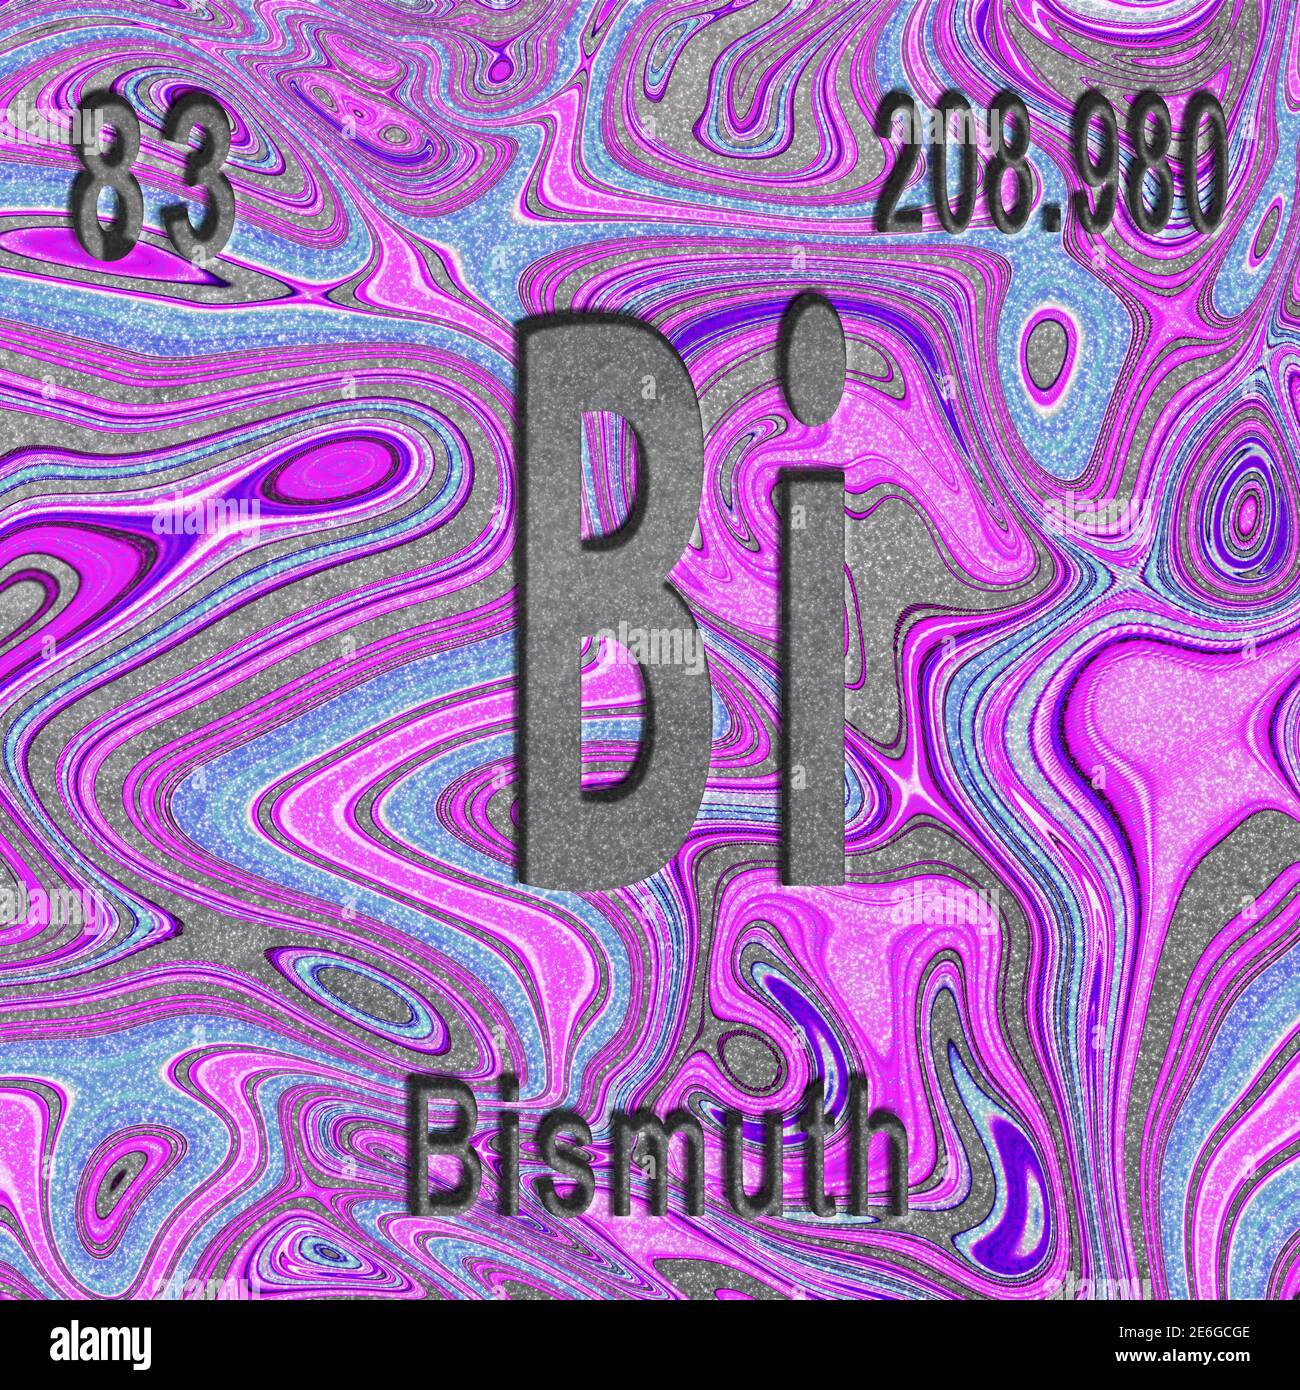 Bismuth chemical element, Sign with atomic number and atomic weight, purple background, Periodic Table Element Stock Photo